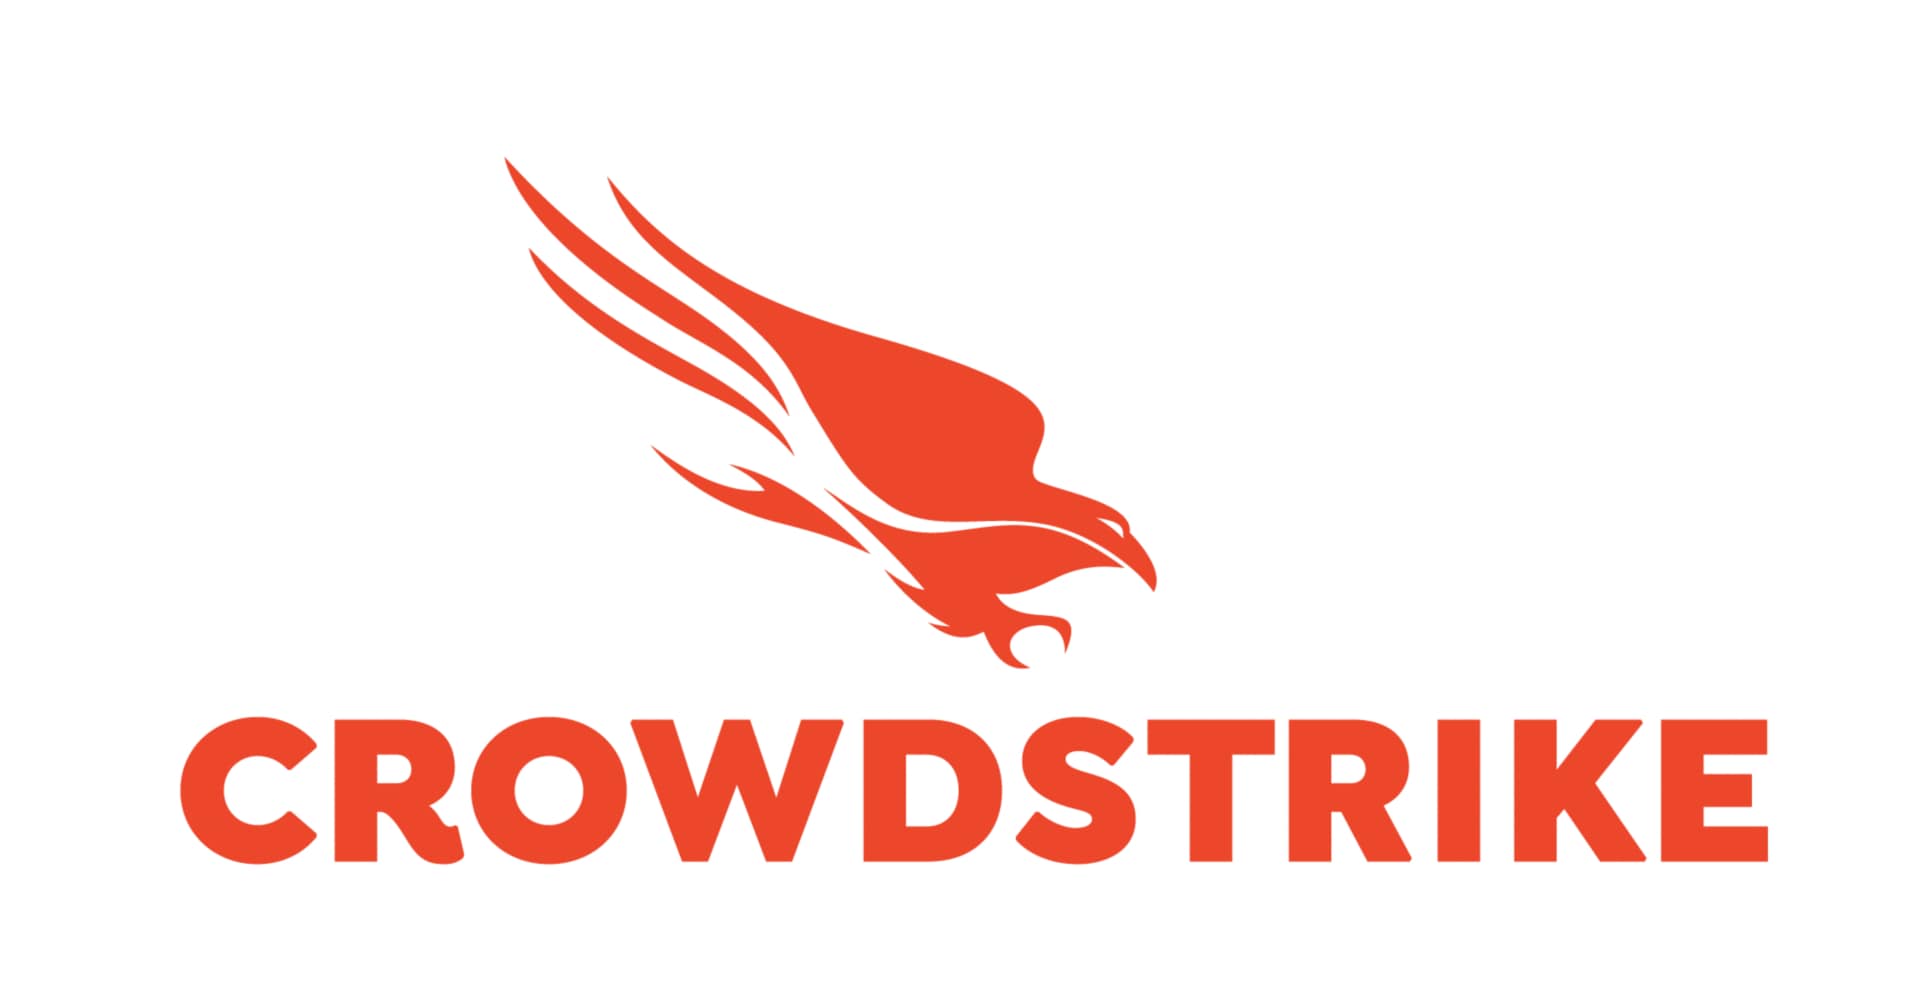 CrowdStrike 17-Month Falcon Overwatch Service (1-149 Licenses)